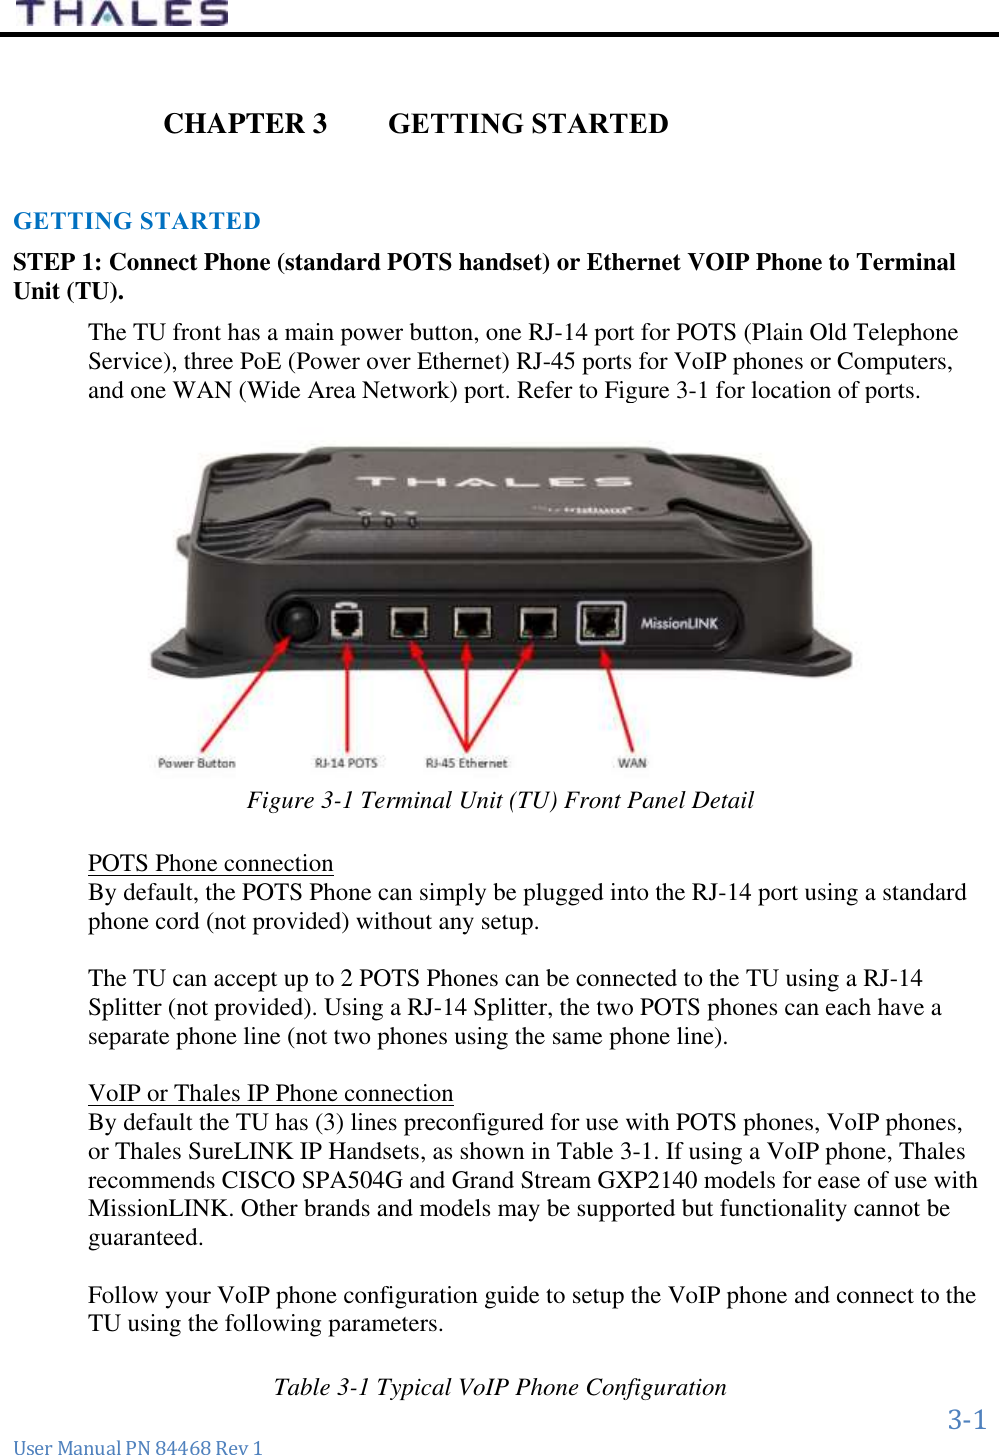      3-1 User Manual PN 84468 Rev 1   GETTING STARTED CHAPTER 3 GETTING STARTED STEP 1: Connect Phone (standard POTS handset) or Ethernet VOIP Phone to Terminal Unit (TU).   The TU front has a main power button, one RJ-14 port for POTS (Plain Old Telephone Service), three PoE (Power over Ethernet) RJ-45 ports for VoIP phones or Computers, and one WAN (Wide Area Network) port. Refer to Figure 3-1 for location of ports.  Figure 3-1 Terminal Unit (TU) Front Panel Detail   POTS Phone connection By default, the POTS Phone can simply be plugged into the RJ-14 port using a standard phone cord (not provided) without any setup.   The TU can accept up to 2 POTS Phones can be connected to the TU using a RJ-14 Splitter (not provided). Using a RJ-14 Splitter, the two POTS phones can each have a separate phone line (not two phones using the same phone line).  VoIP or Thales IP Phone connection By default the TU has (3) lines preconfigured for use with POTS phones, VoIP phones, or Thales SureLINK IP Handsets, as shown in Table 3-1. If using a VoIP phone, Thales recommends CISCO SPA504G and Grand Stream GXP2140 models for ease of use with MissionLINK. Other brands and models may be supported but functionality cannot be guaranteed.   Follow your VoIP phone configuration guide to setup the VoIP phone and connect to the TU using the following parameters.  Table 3-1 Typical VoIP Phone Configuration 